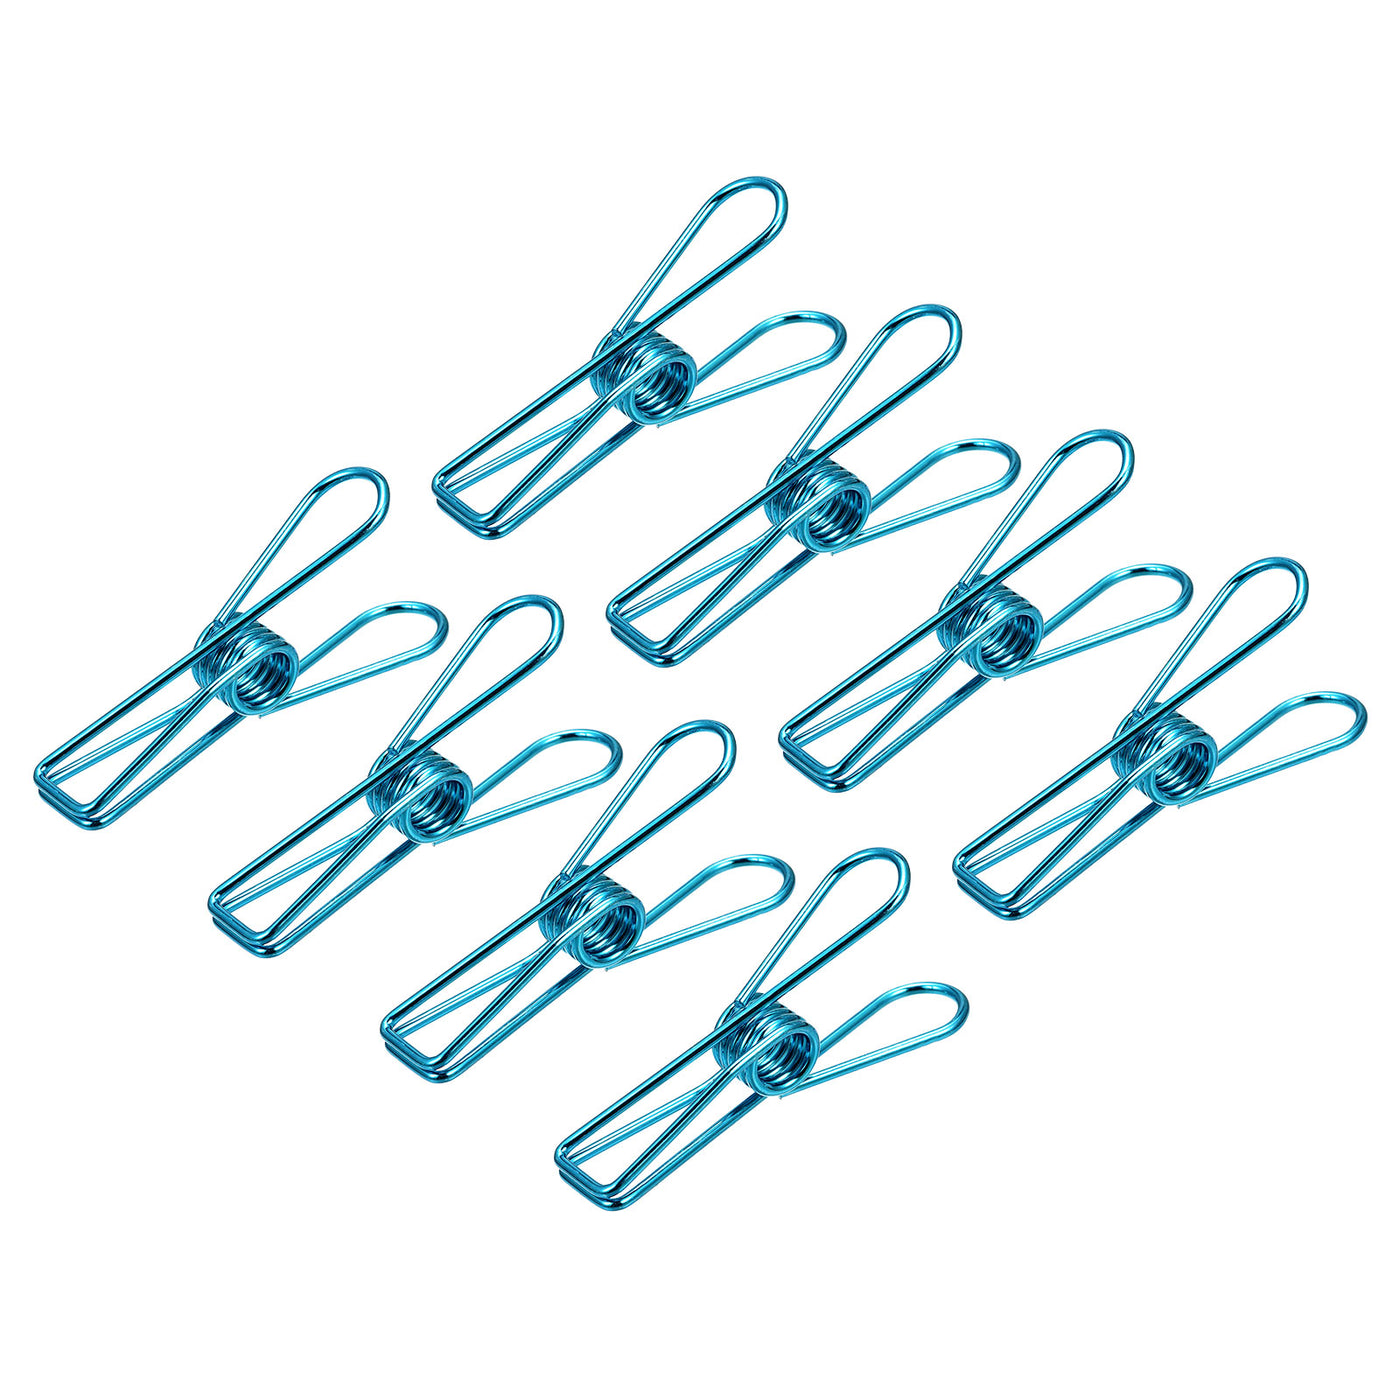 uxcell Uxcell Tablecloth Clips, 55mm Carbon Steel Clamps for Fix Table Cloth, Blue 16 Pcs